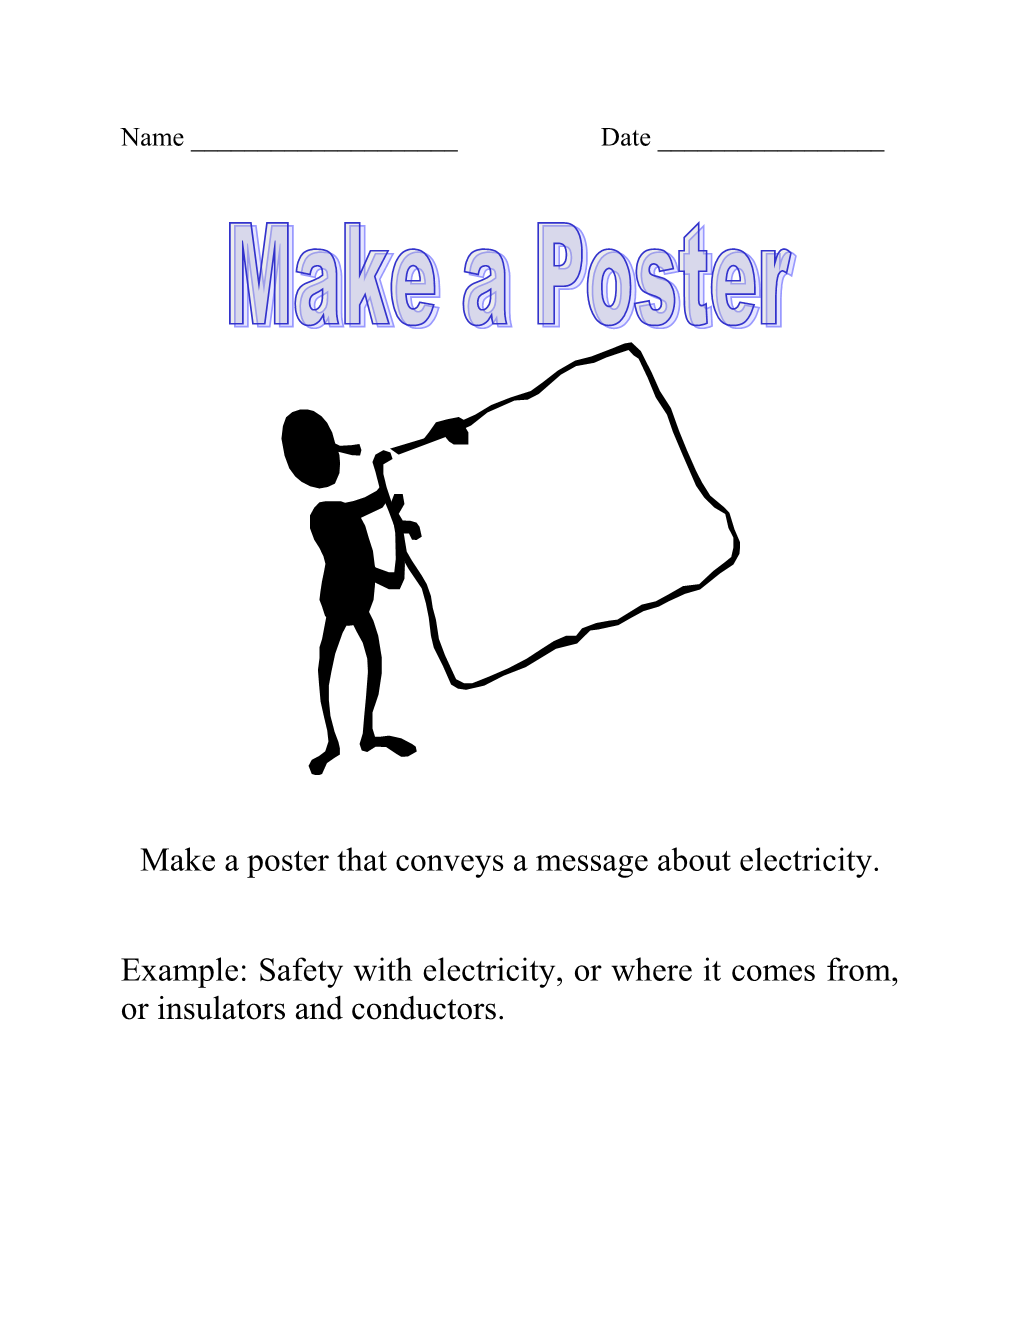 Make a Poster That Conveys a Message About Electricity